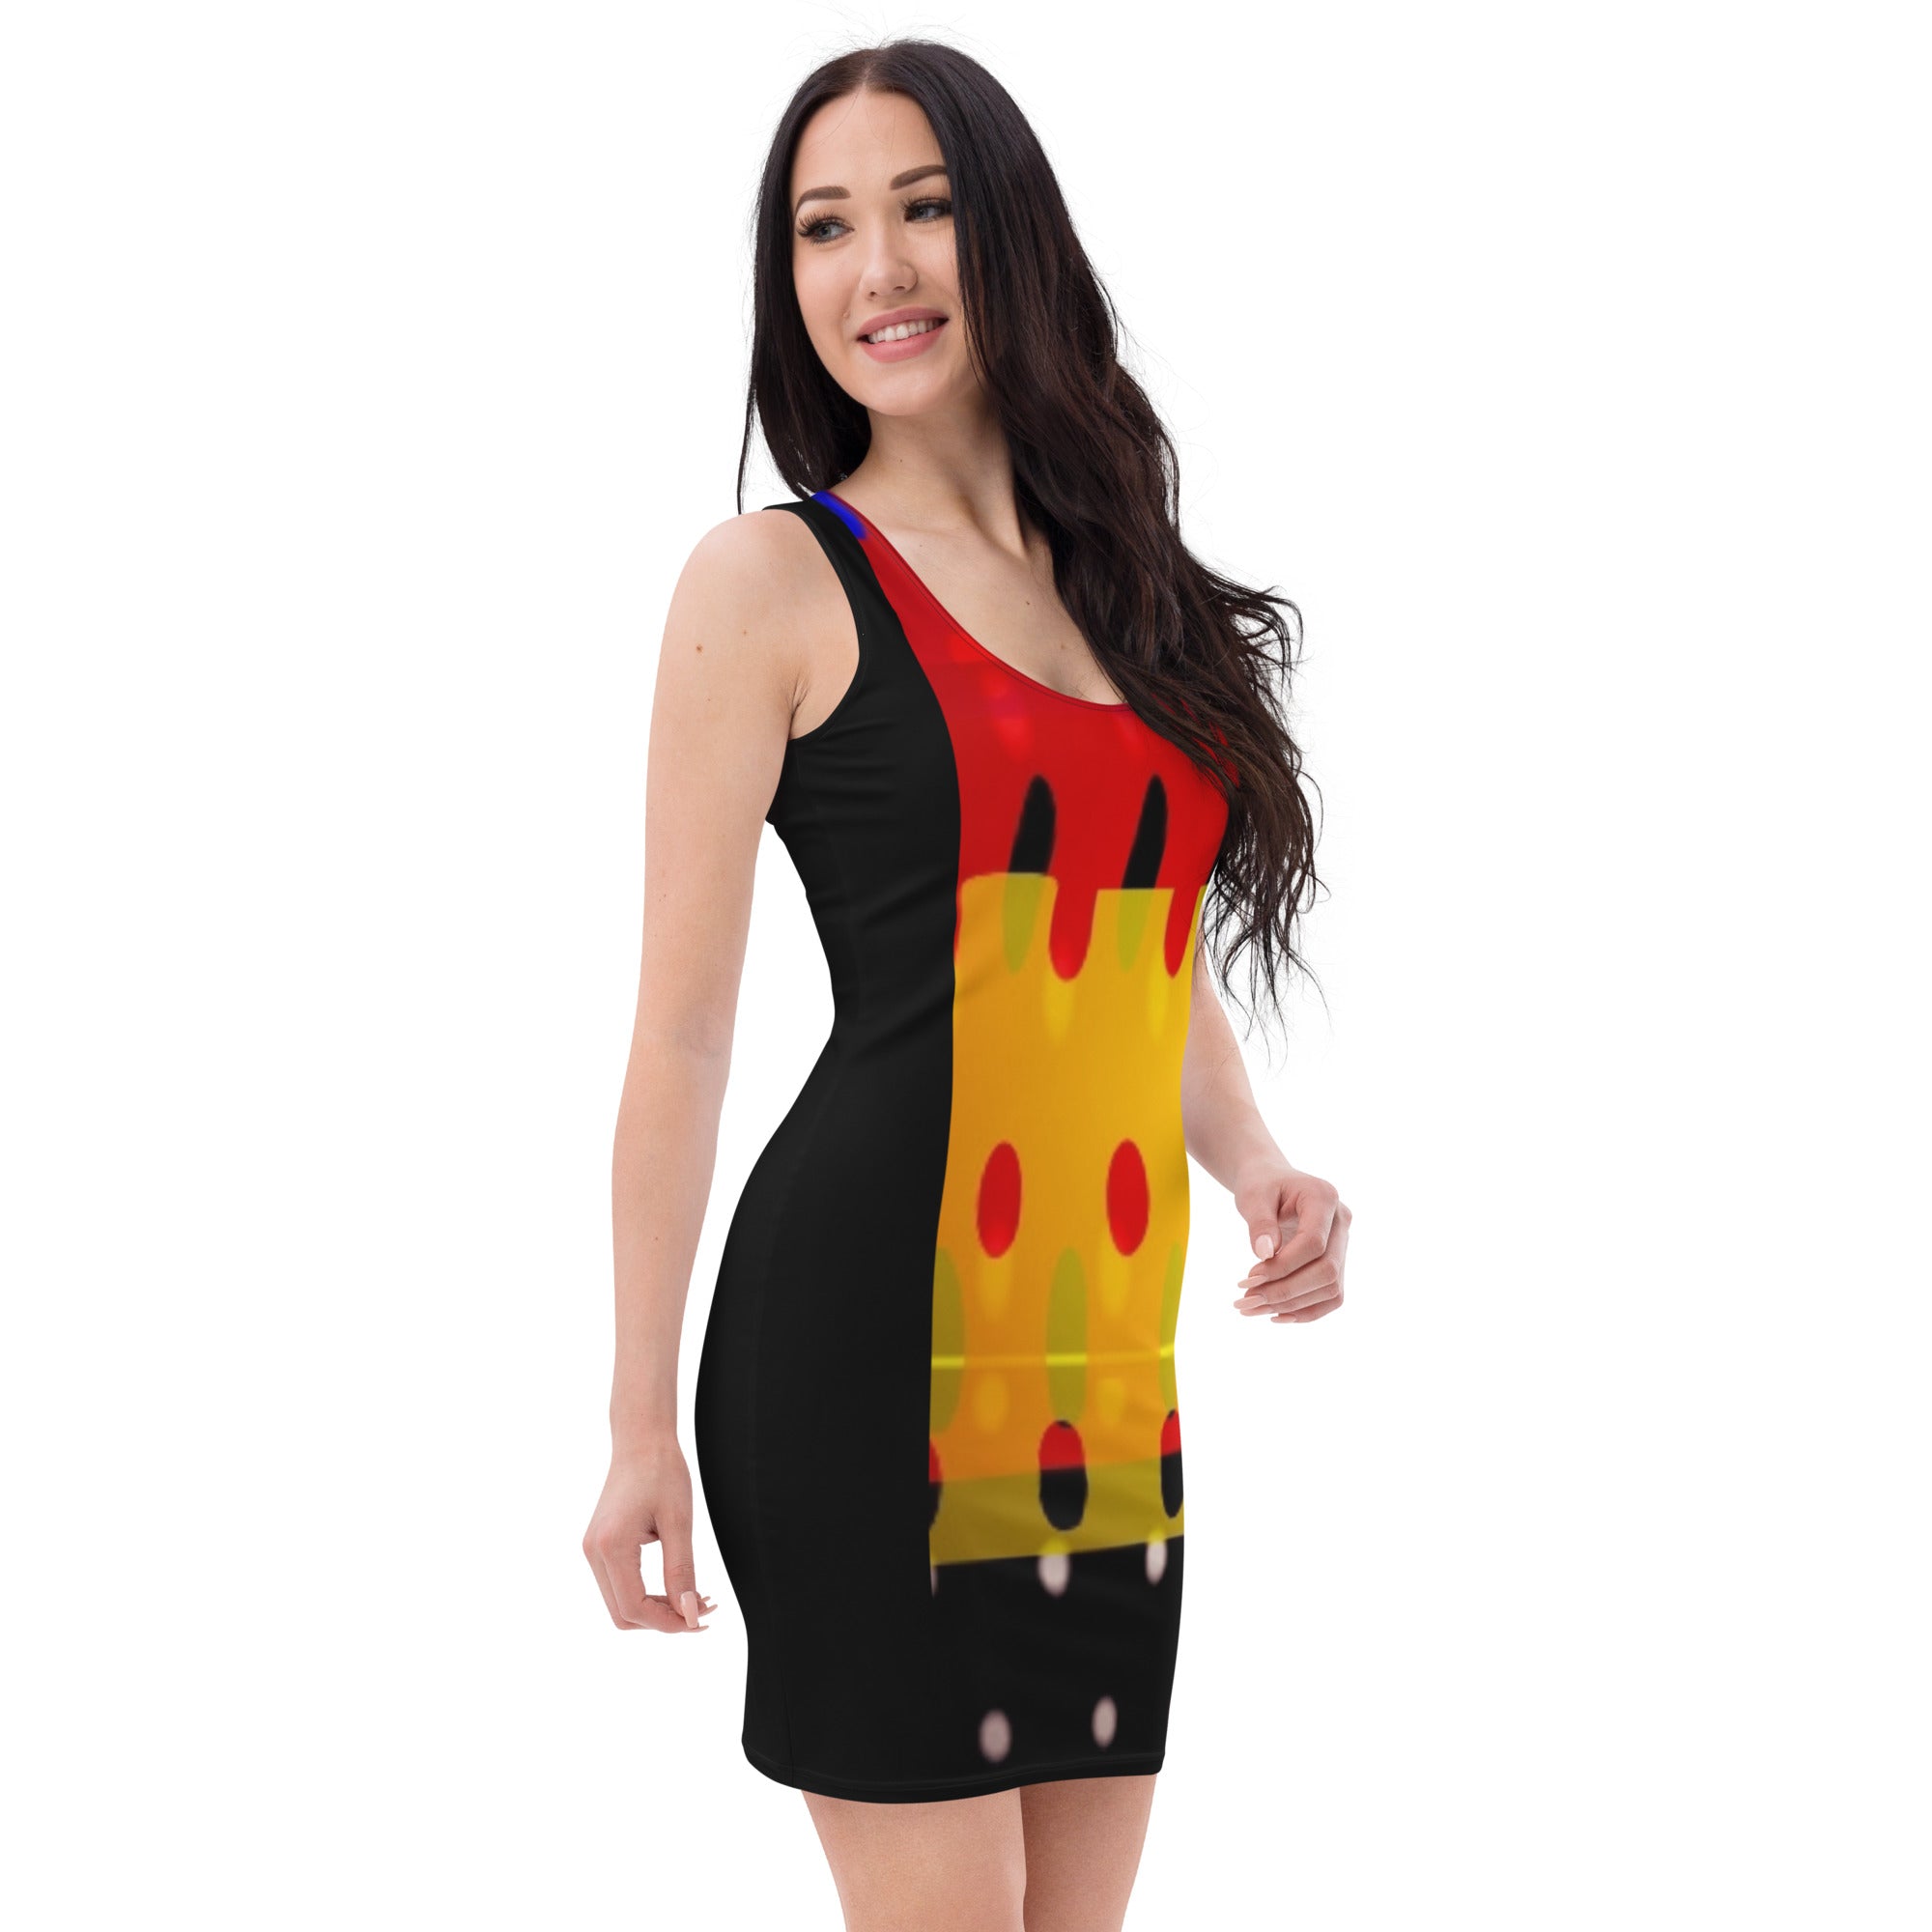 Women's Red and Black Fitted Sleeveless Tank Dress | Andrea and Me and Me Too